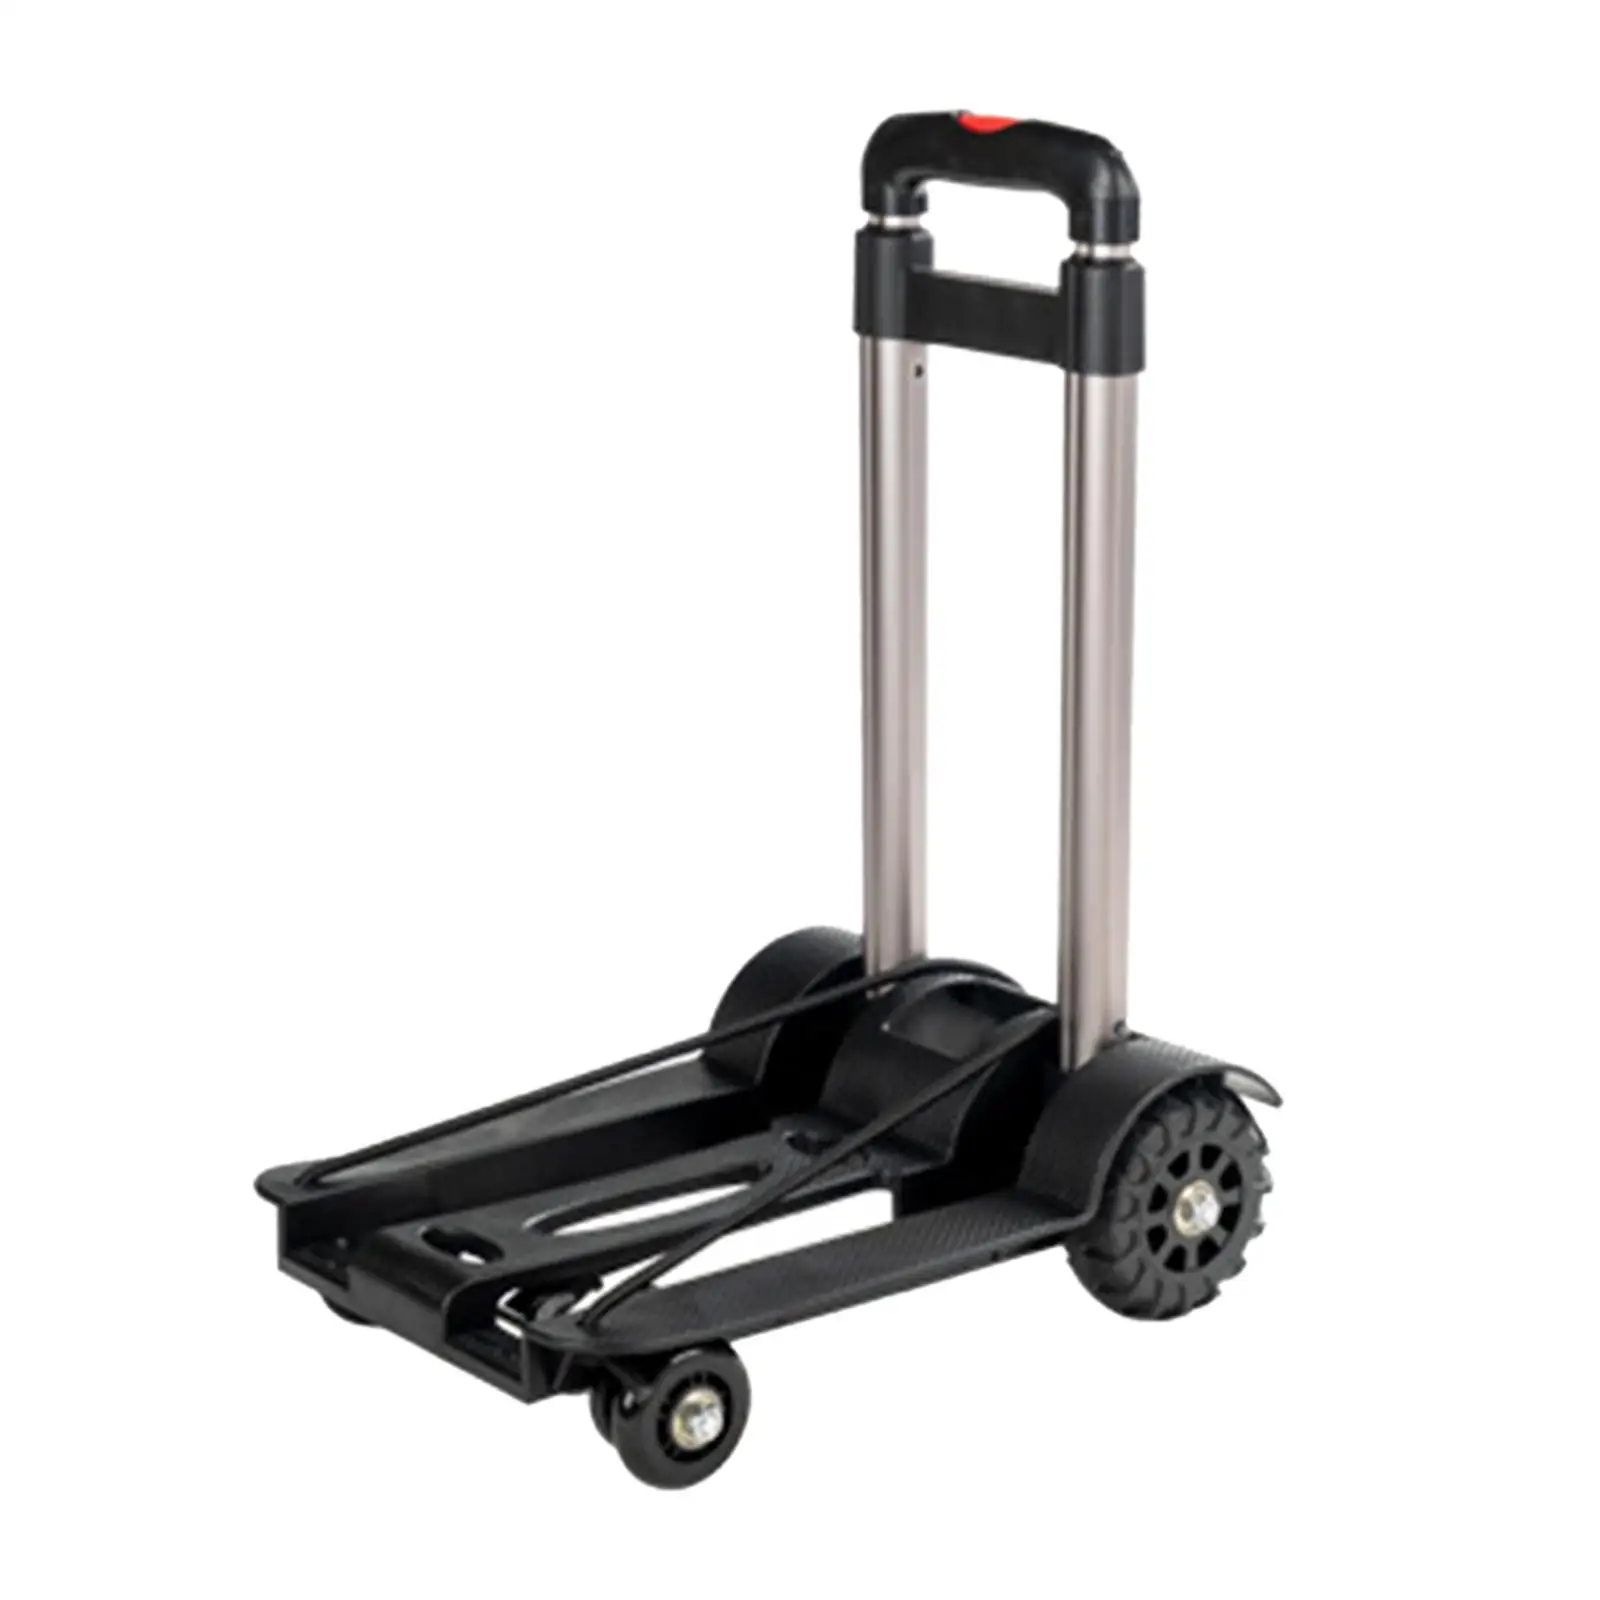 Folding Hand Truck Utility Cart with 2 Rubber Wheels with Telescopic Handle Portable Moving Luggage Cart for Travel Household